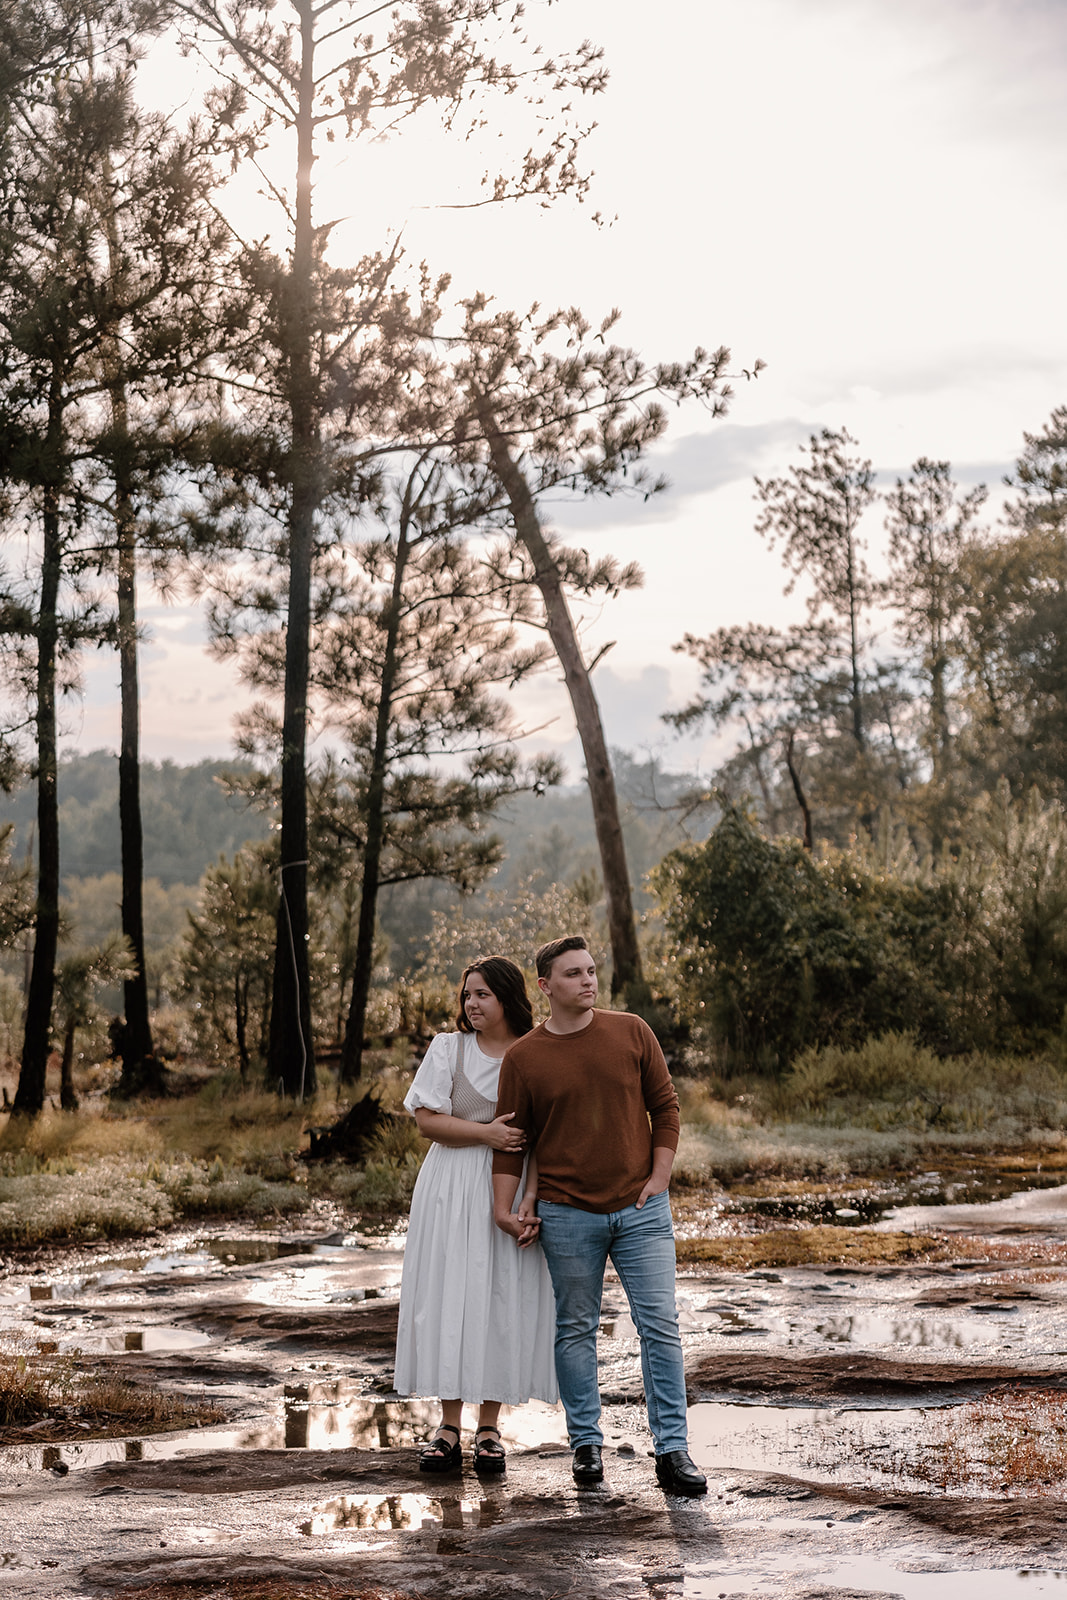 Adventure Couples Session with dreamy backdrops and golden hour mountain views in Arabia Mountain.